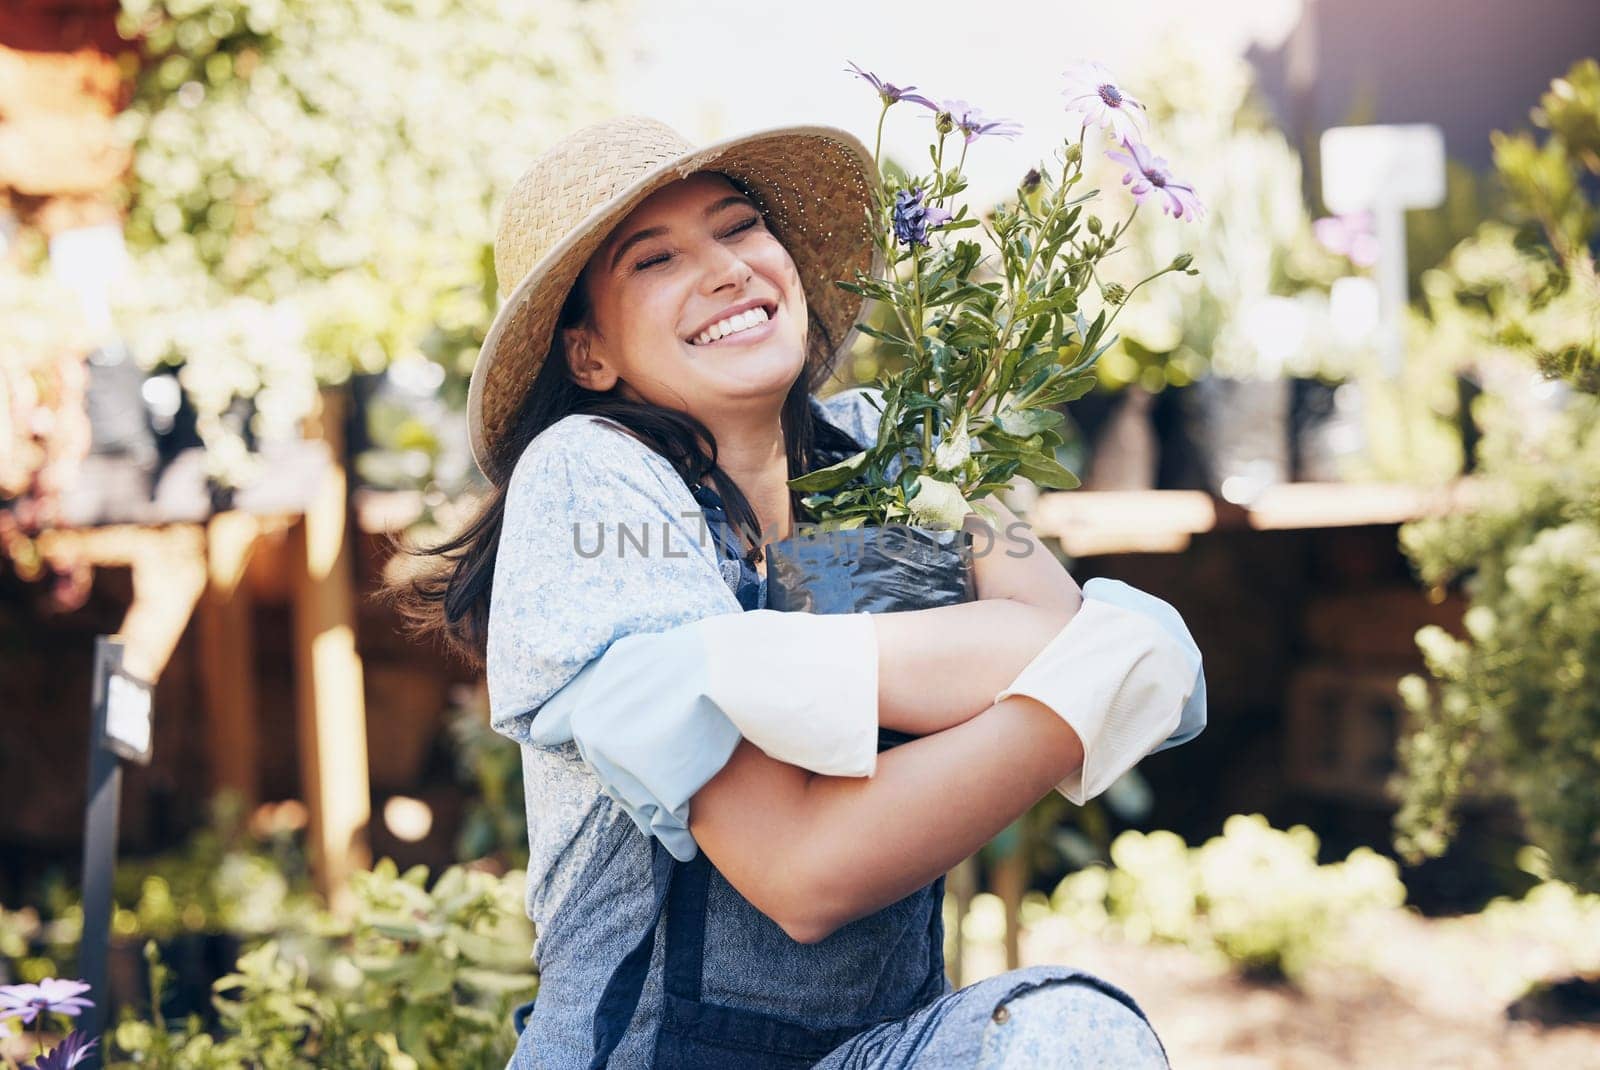 Plant, outdoor garden and smile of woman hug flowers for environment, sustainability or ecology. Nature, happiness and female person for green nursery, agriculture or landscaping in backyard.